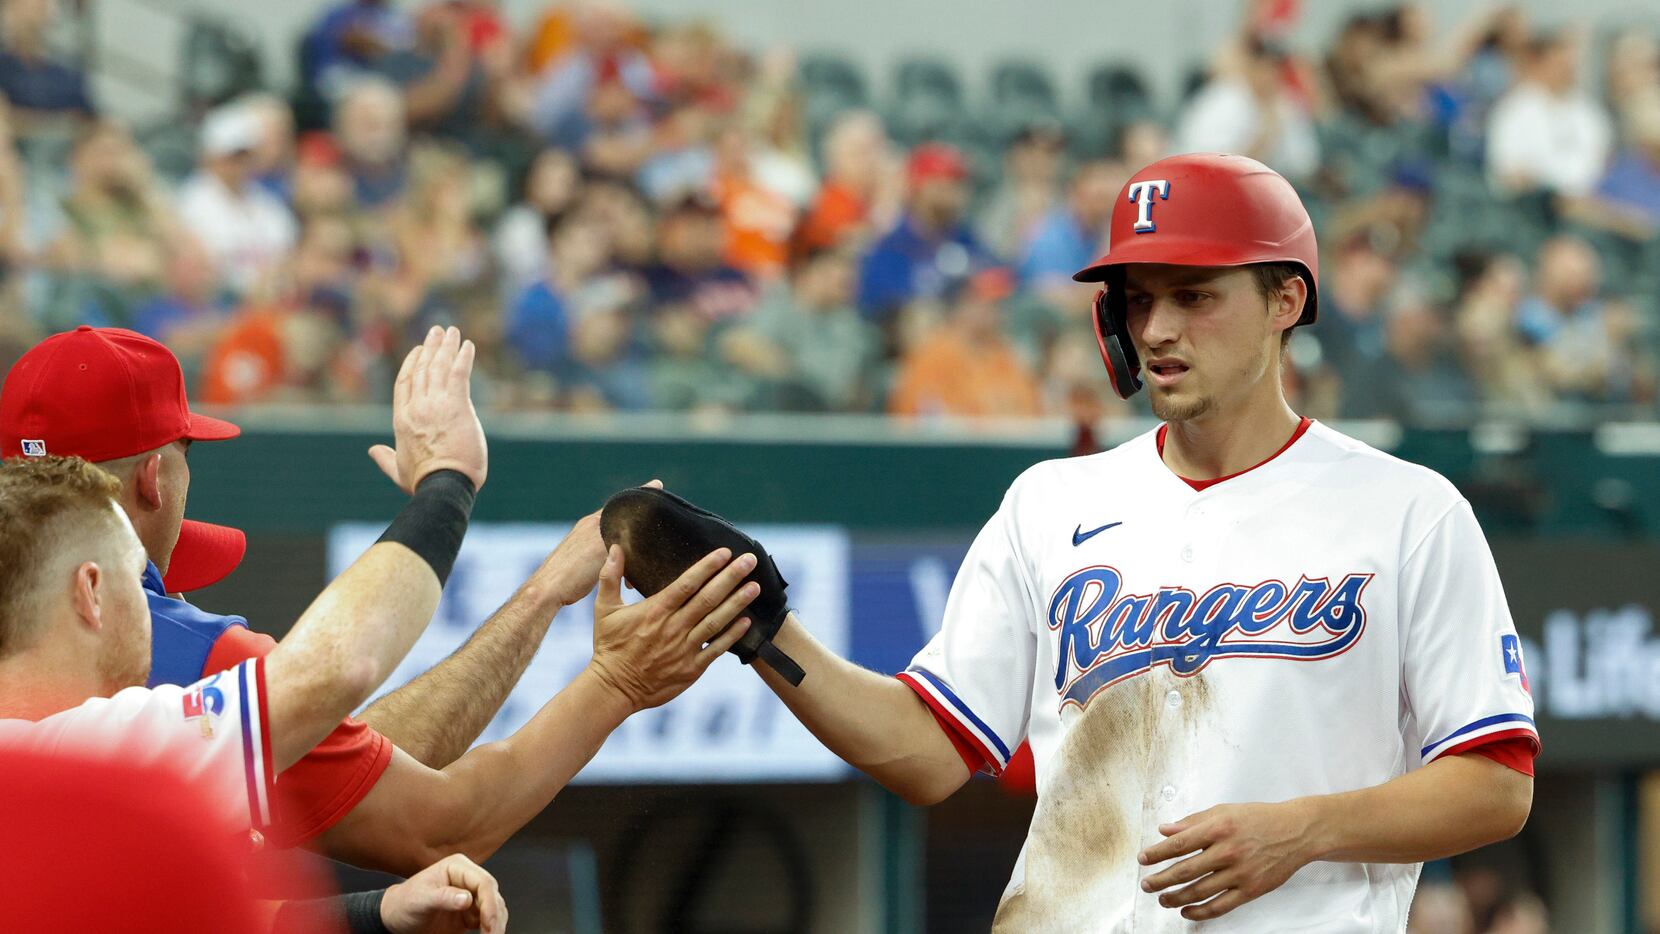 After an unfamiliar debut with Rangers, Corey Seager is ready for his new  'normal